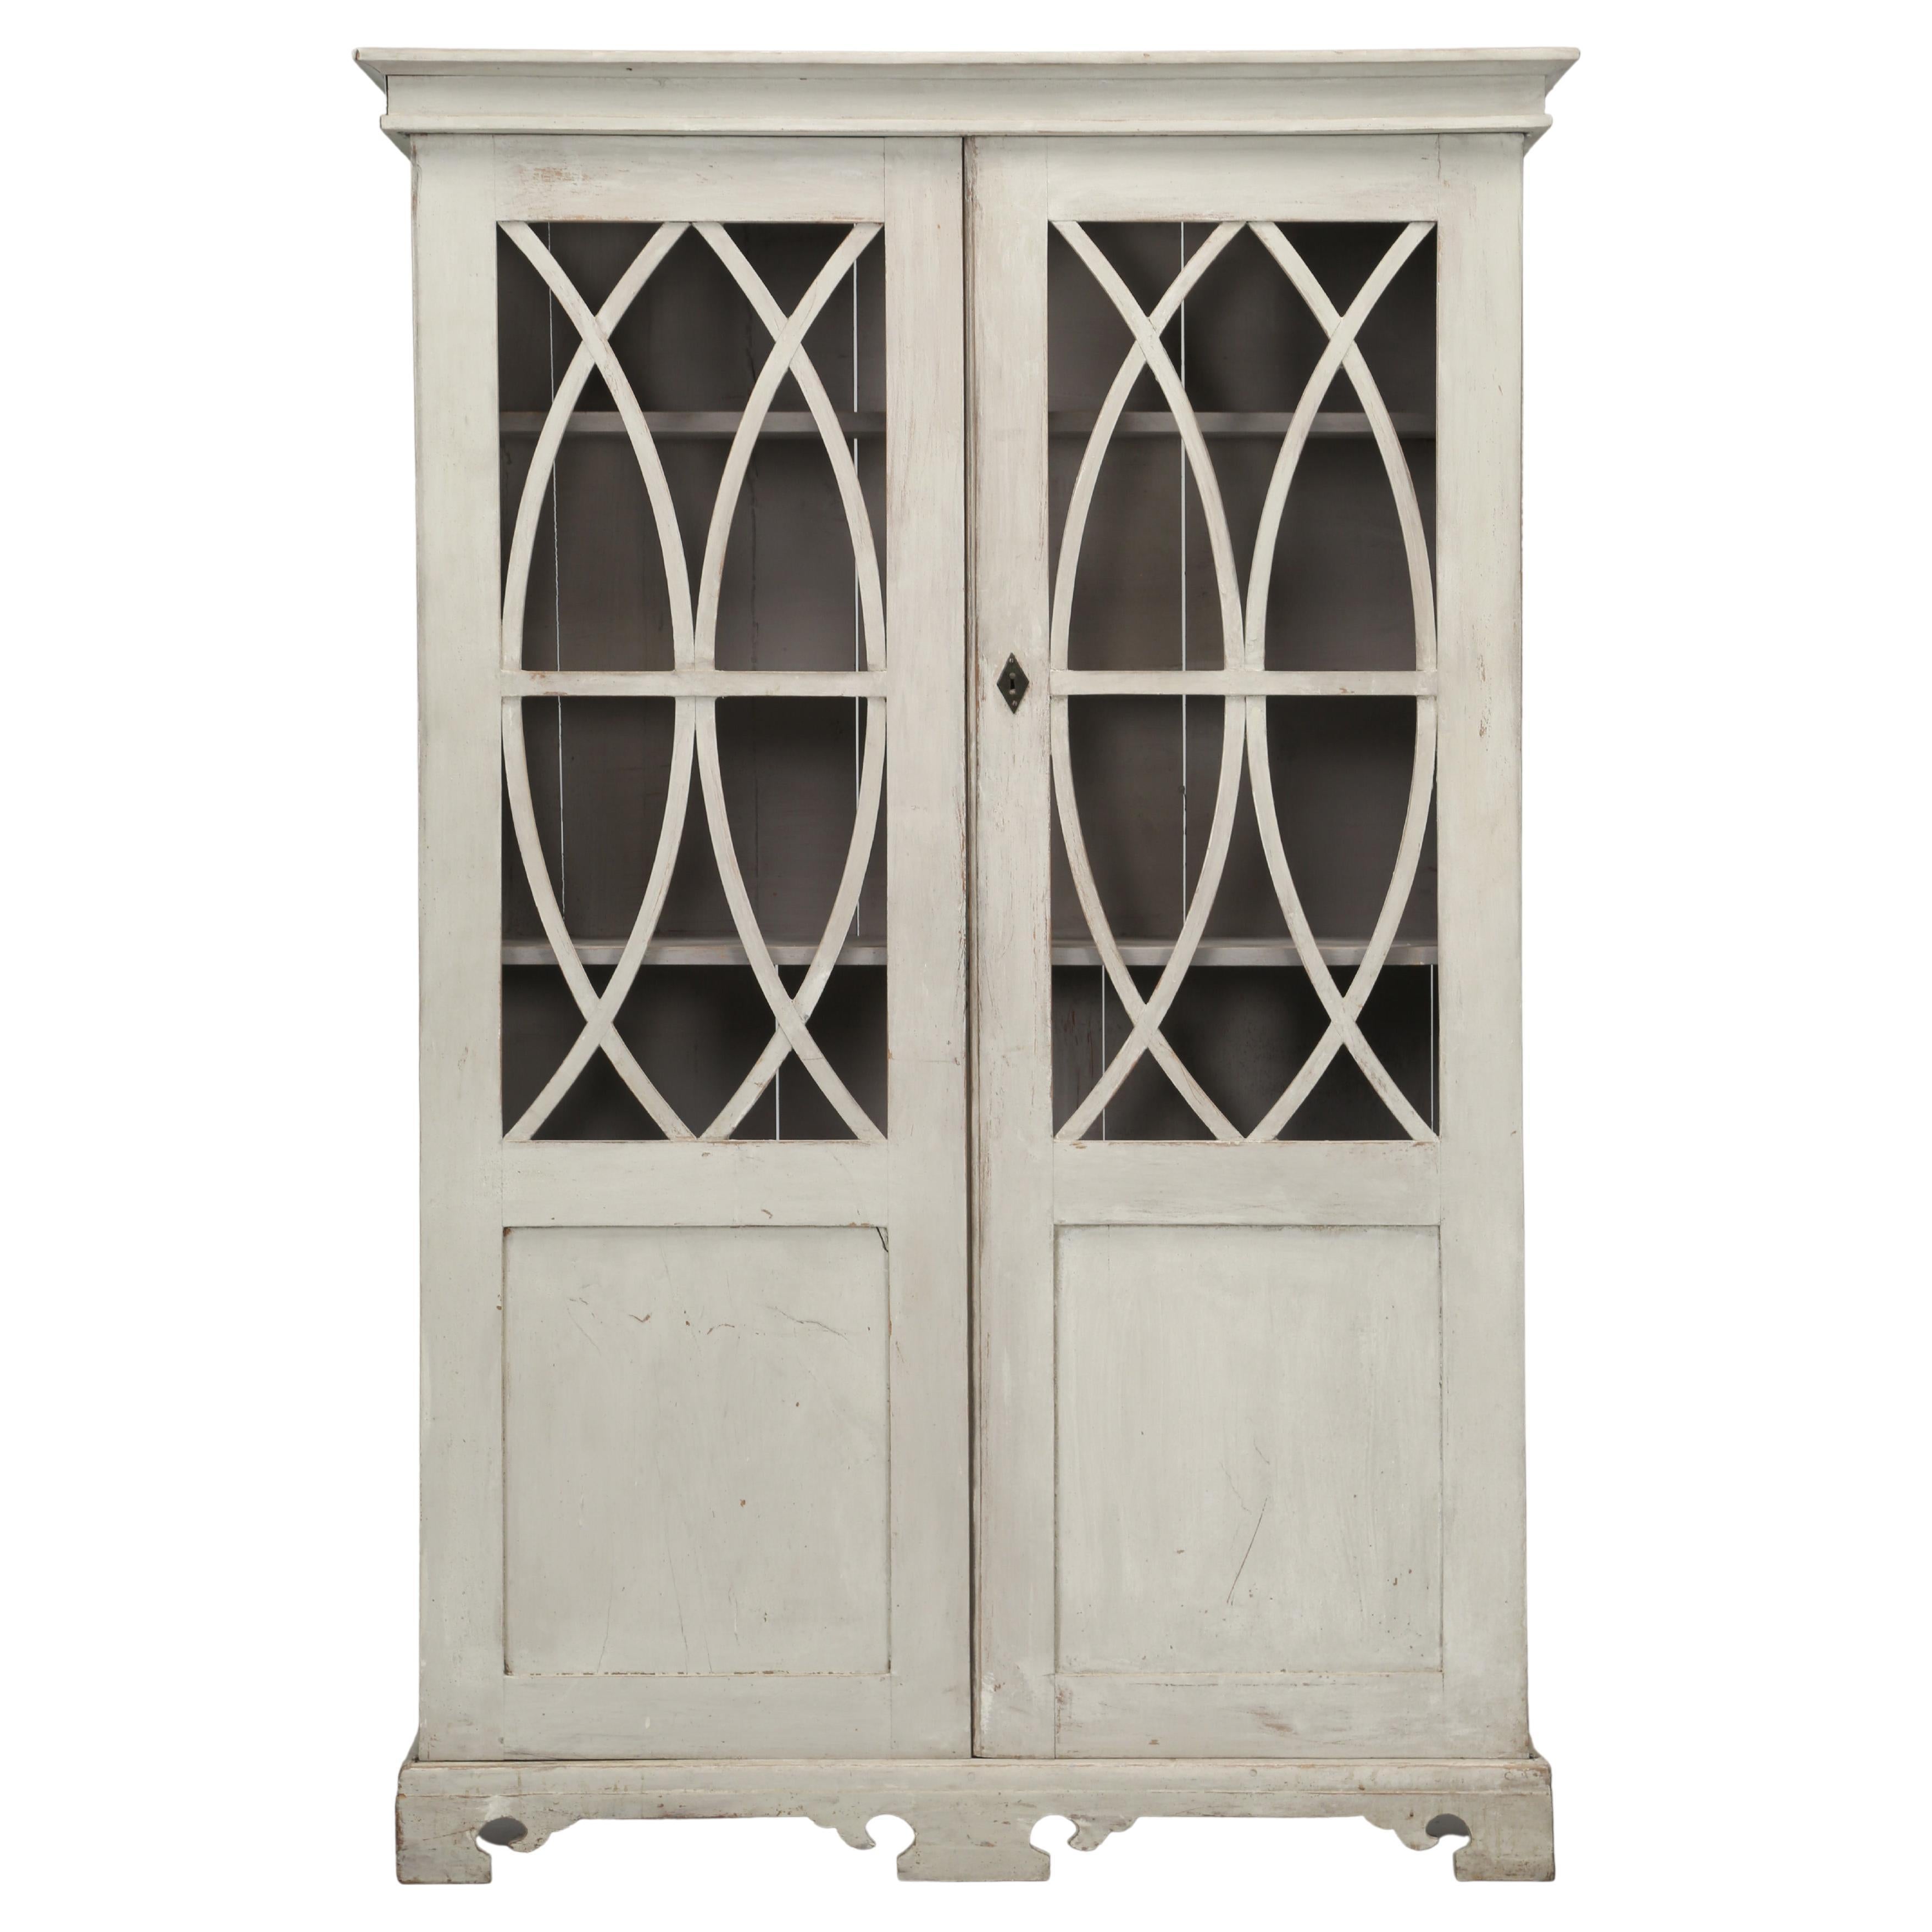 Antique Bookcase or Display Cabinet with Enhanced Recent Paint